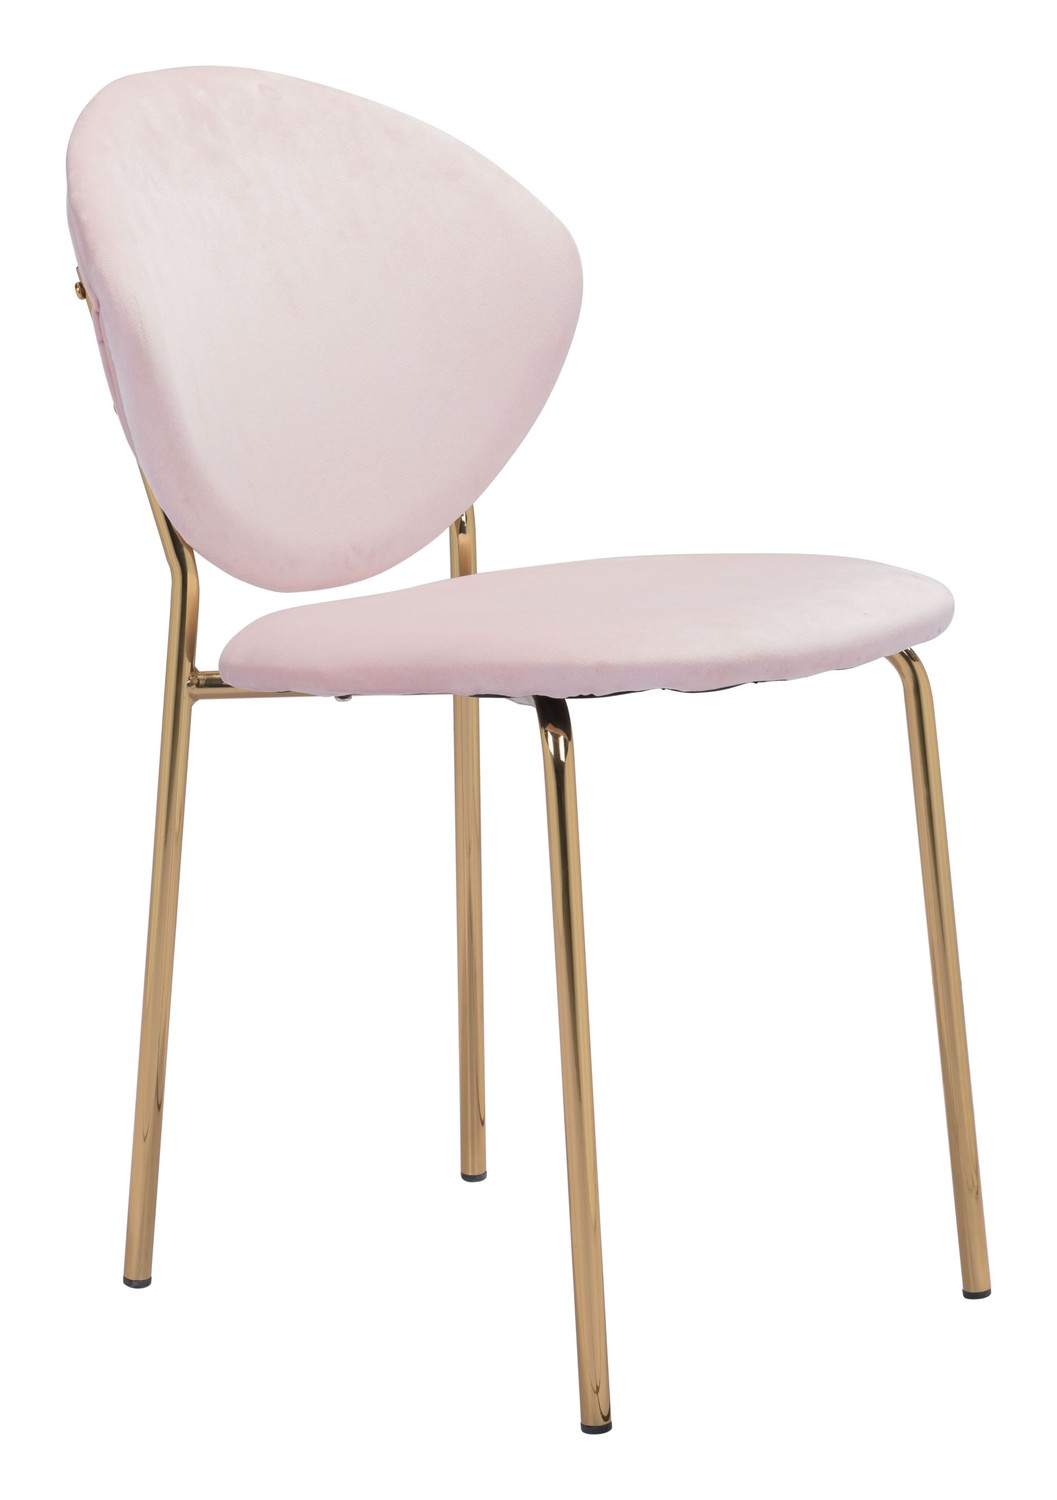 18.1" x 23.6" x 32.3" Pink & Gold, Velvet, Steel & Plywood, Chair - Set of 2